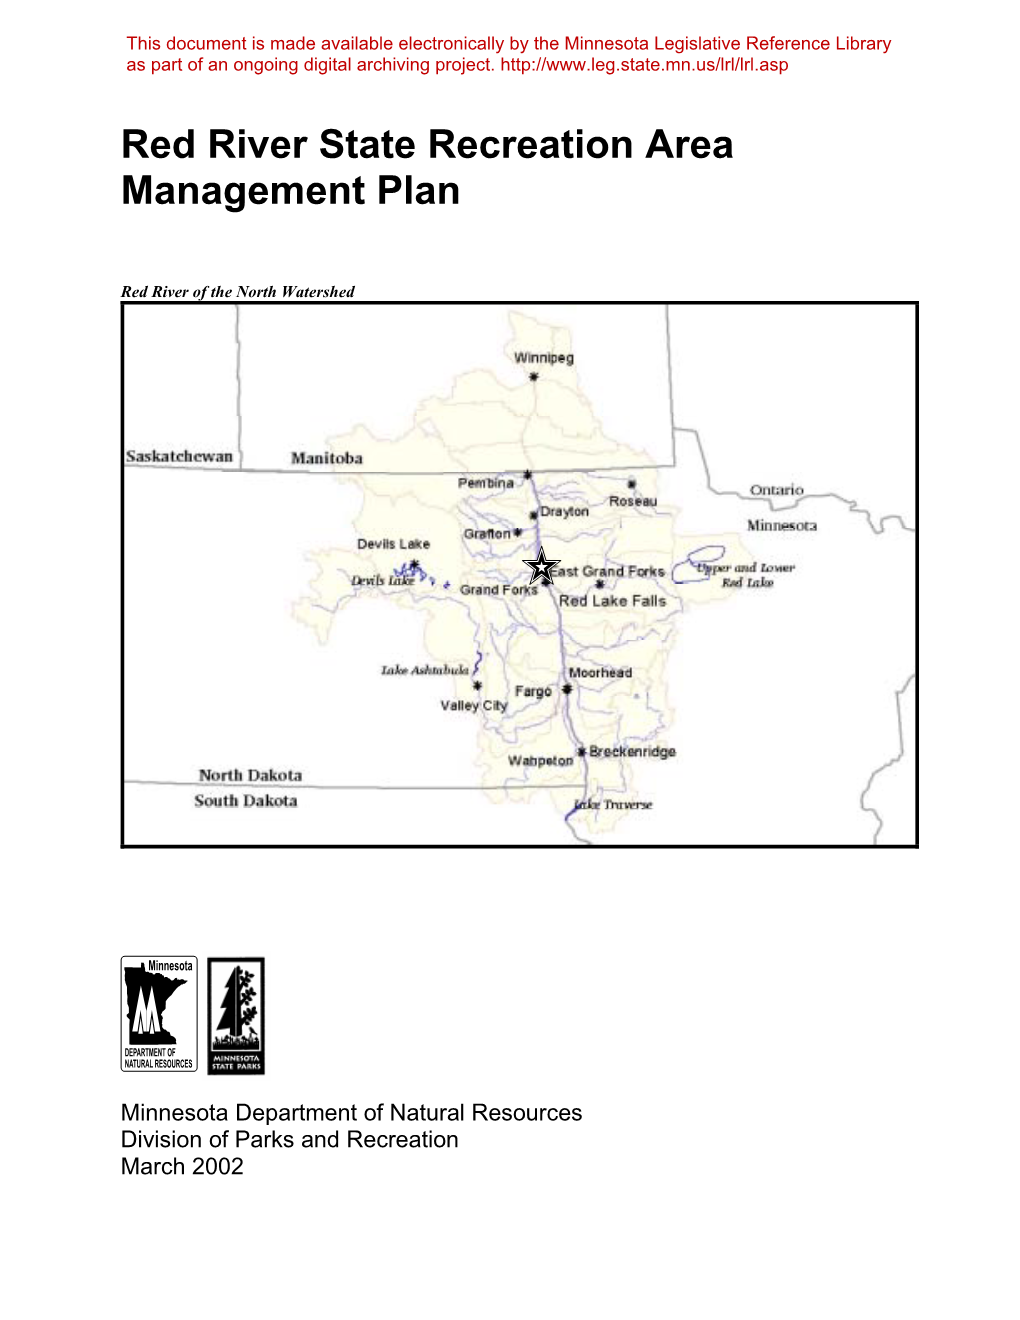 Red River State Recreation Area Management Plan